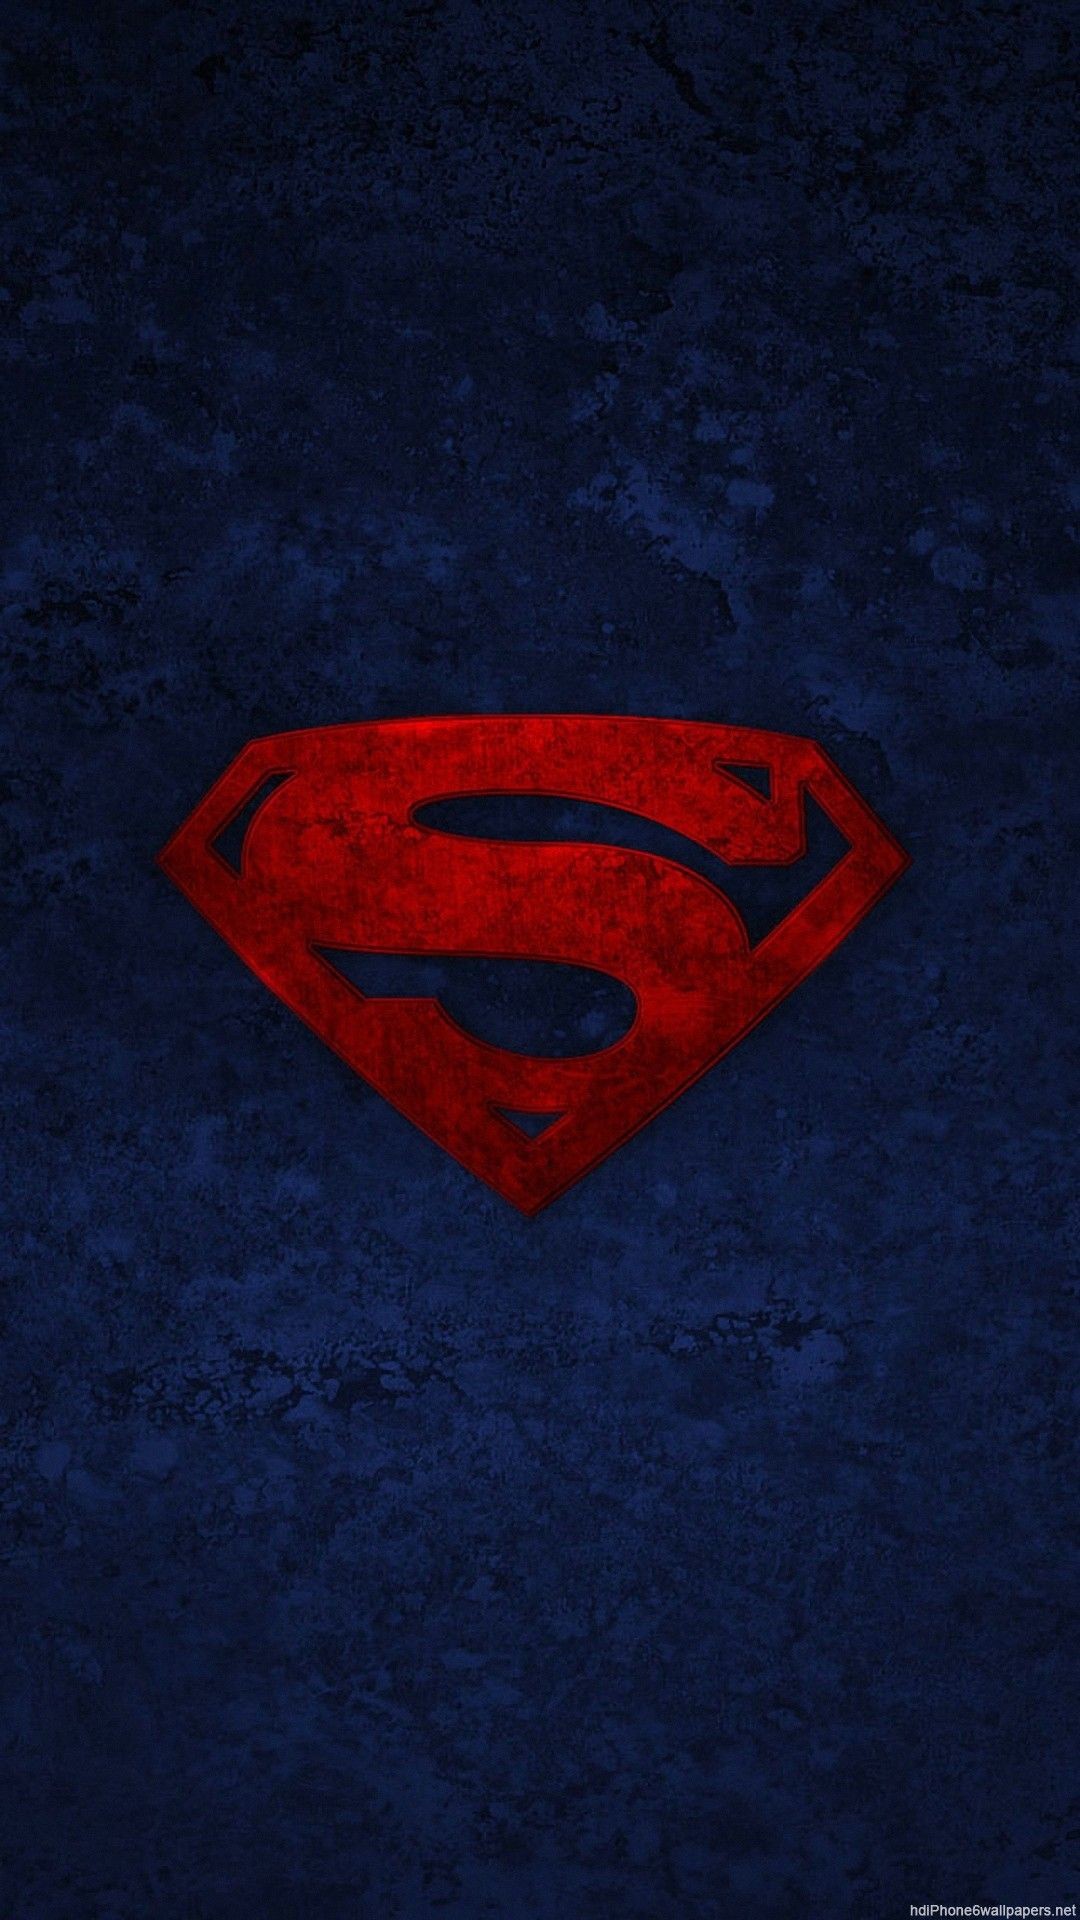 1080x1920   Superman logo iPhone 6 wallpapers HD - 6 Plus  backgrounds